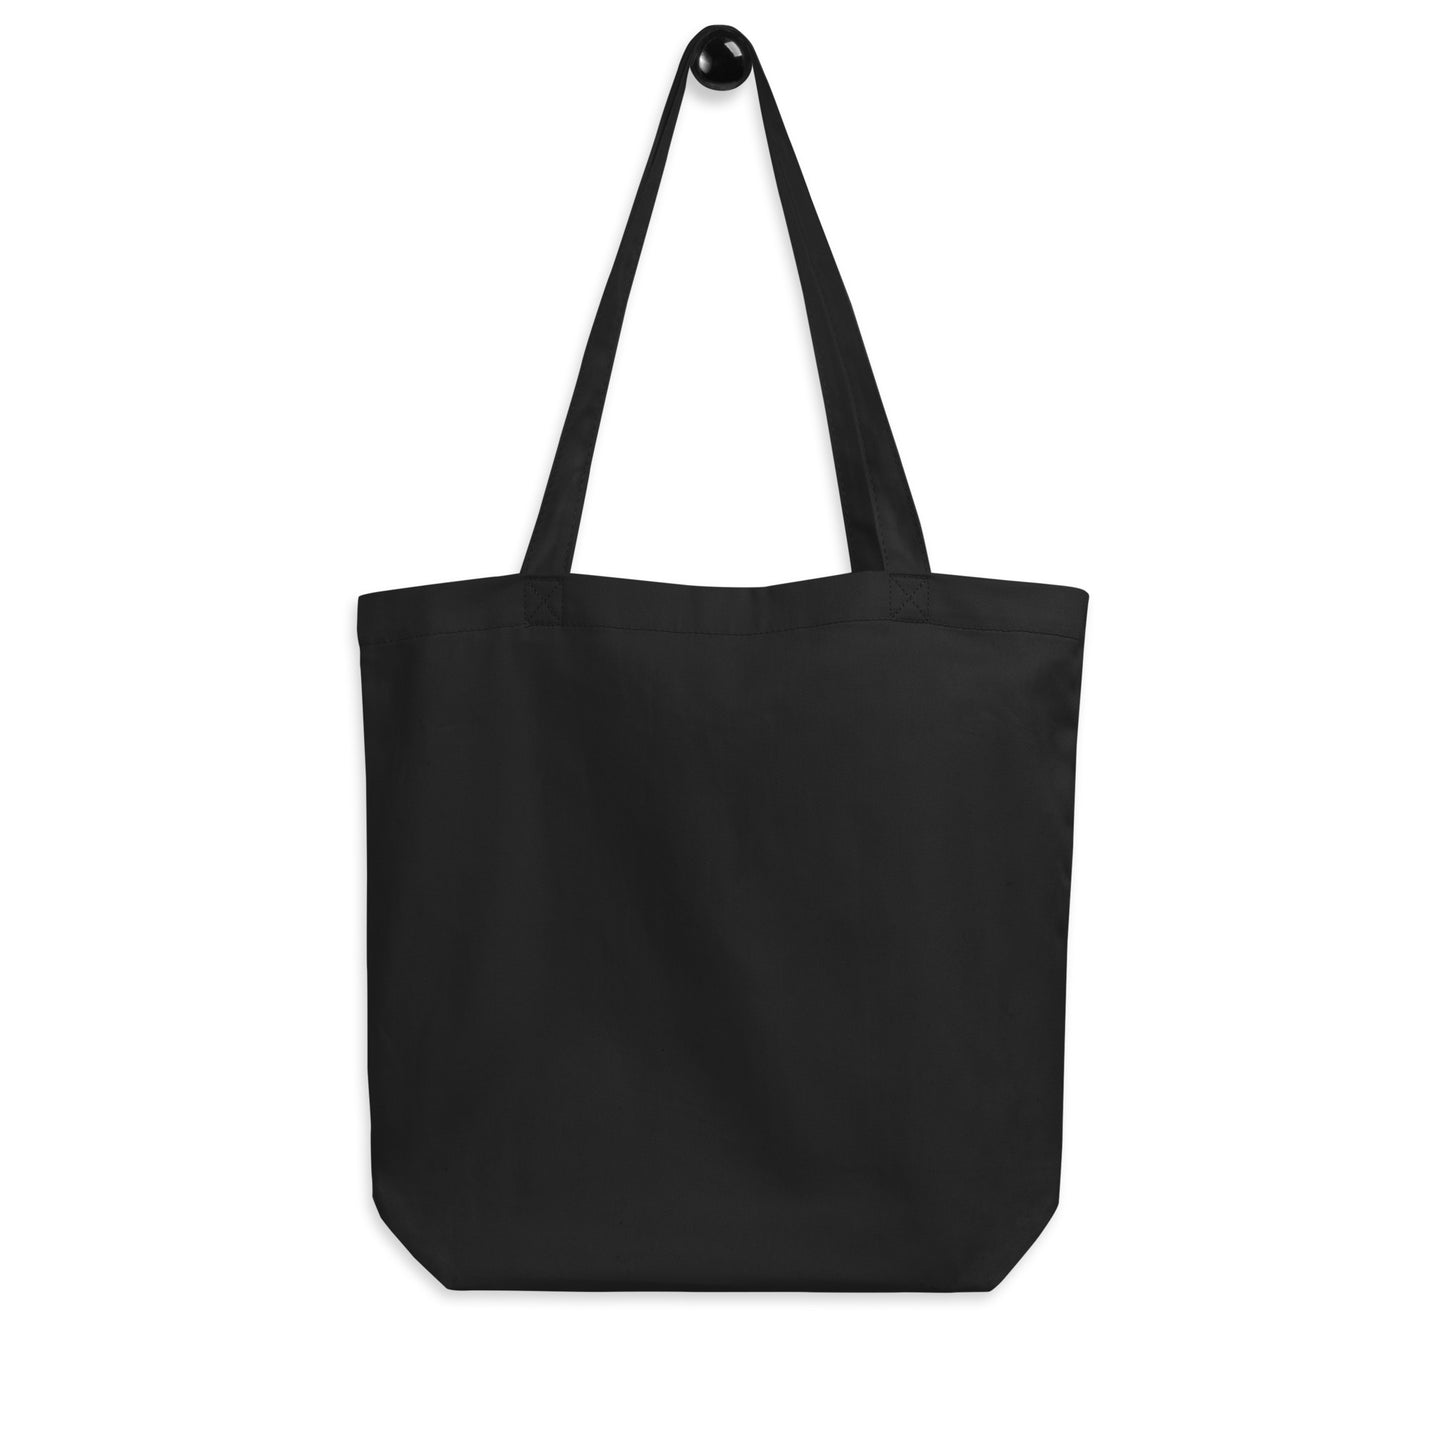 Unique Travel Gift Organic Tote - White Oval • YYG Charlottetown • YHM Designs - Image 05